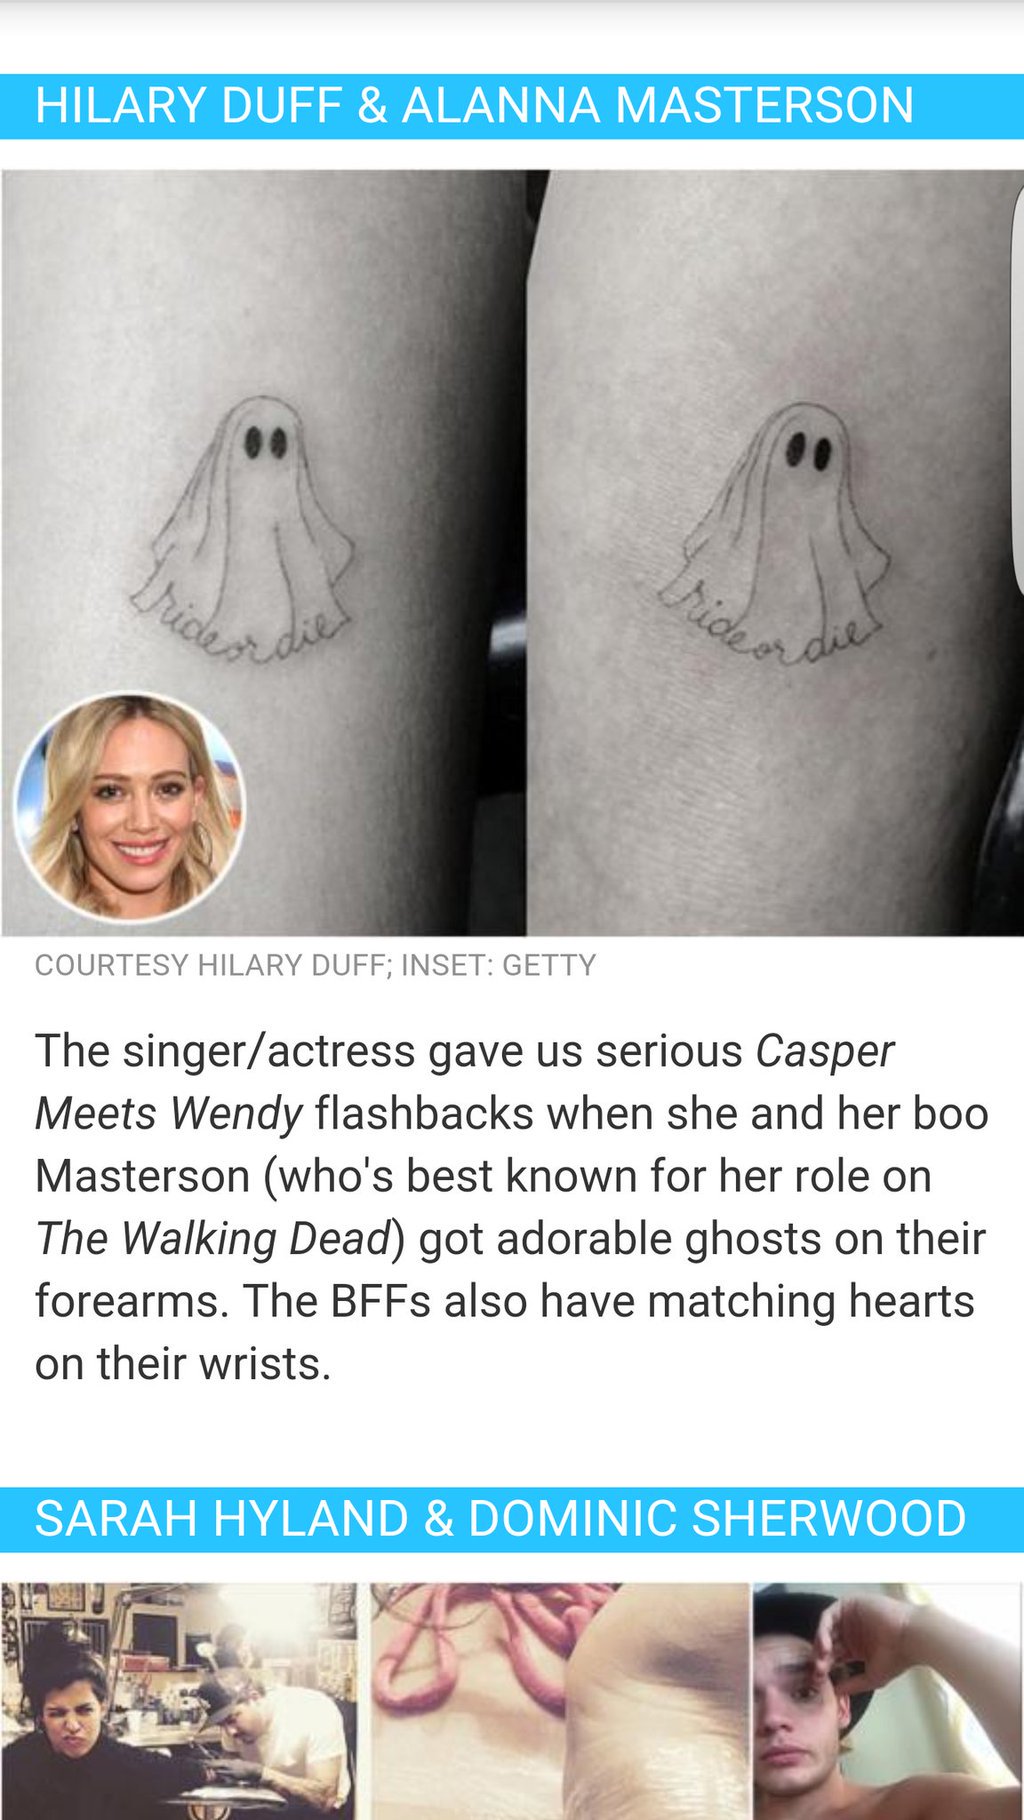 All of Hilary Duff's tattoos and what they mean